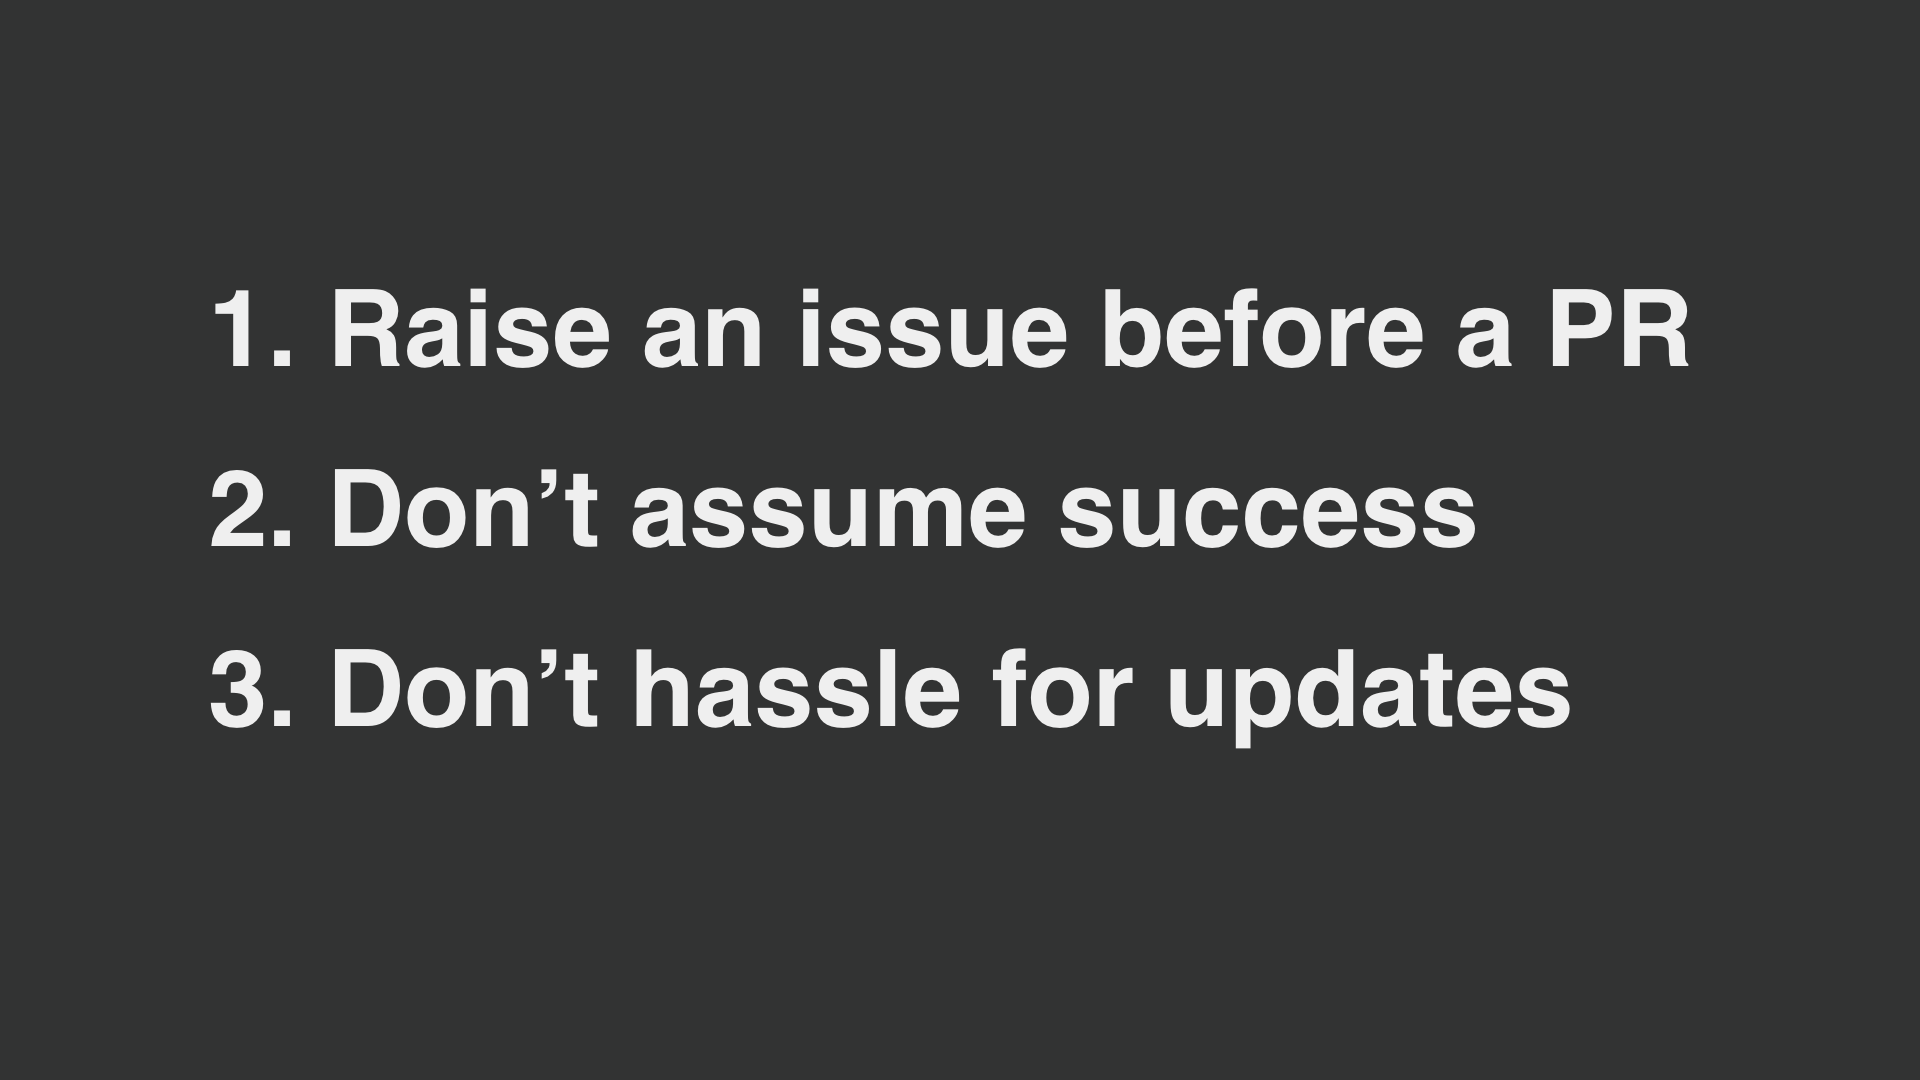 text: 1. Raise an issue before a PR, 2. Donʼt assume success, 3. Donʼt hassle for updates